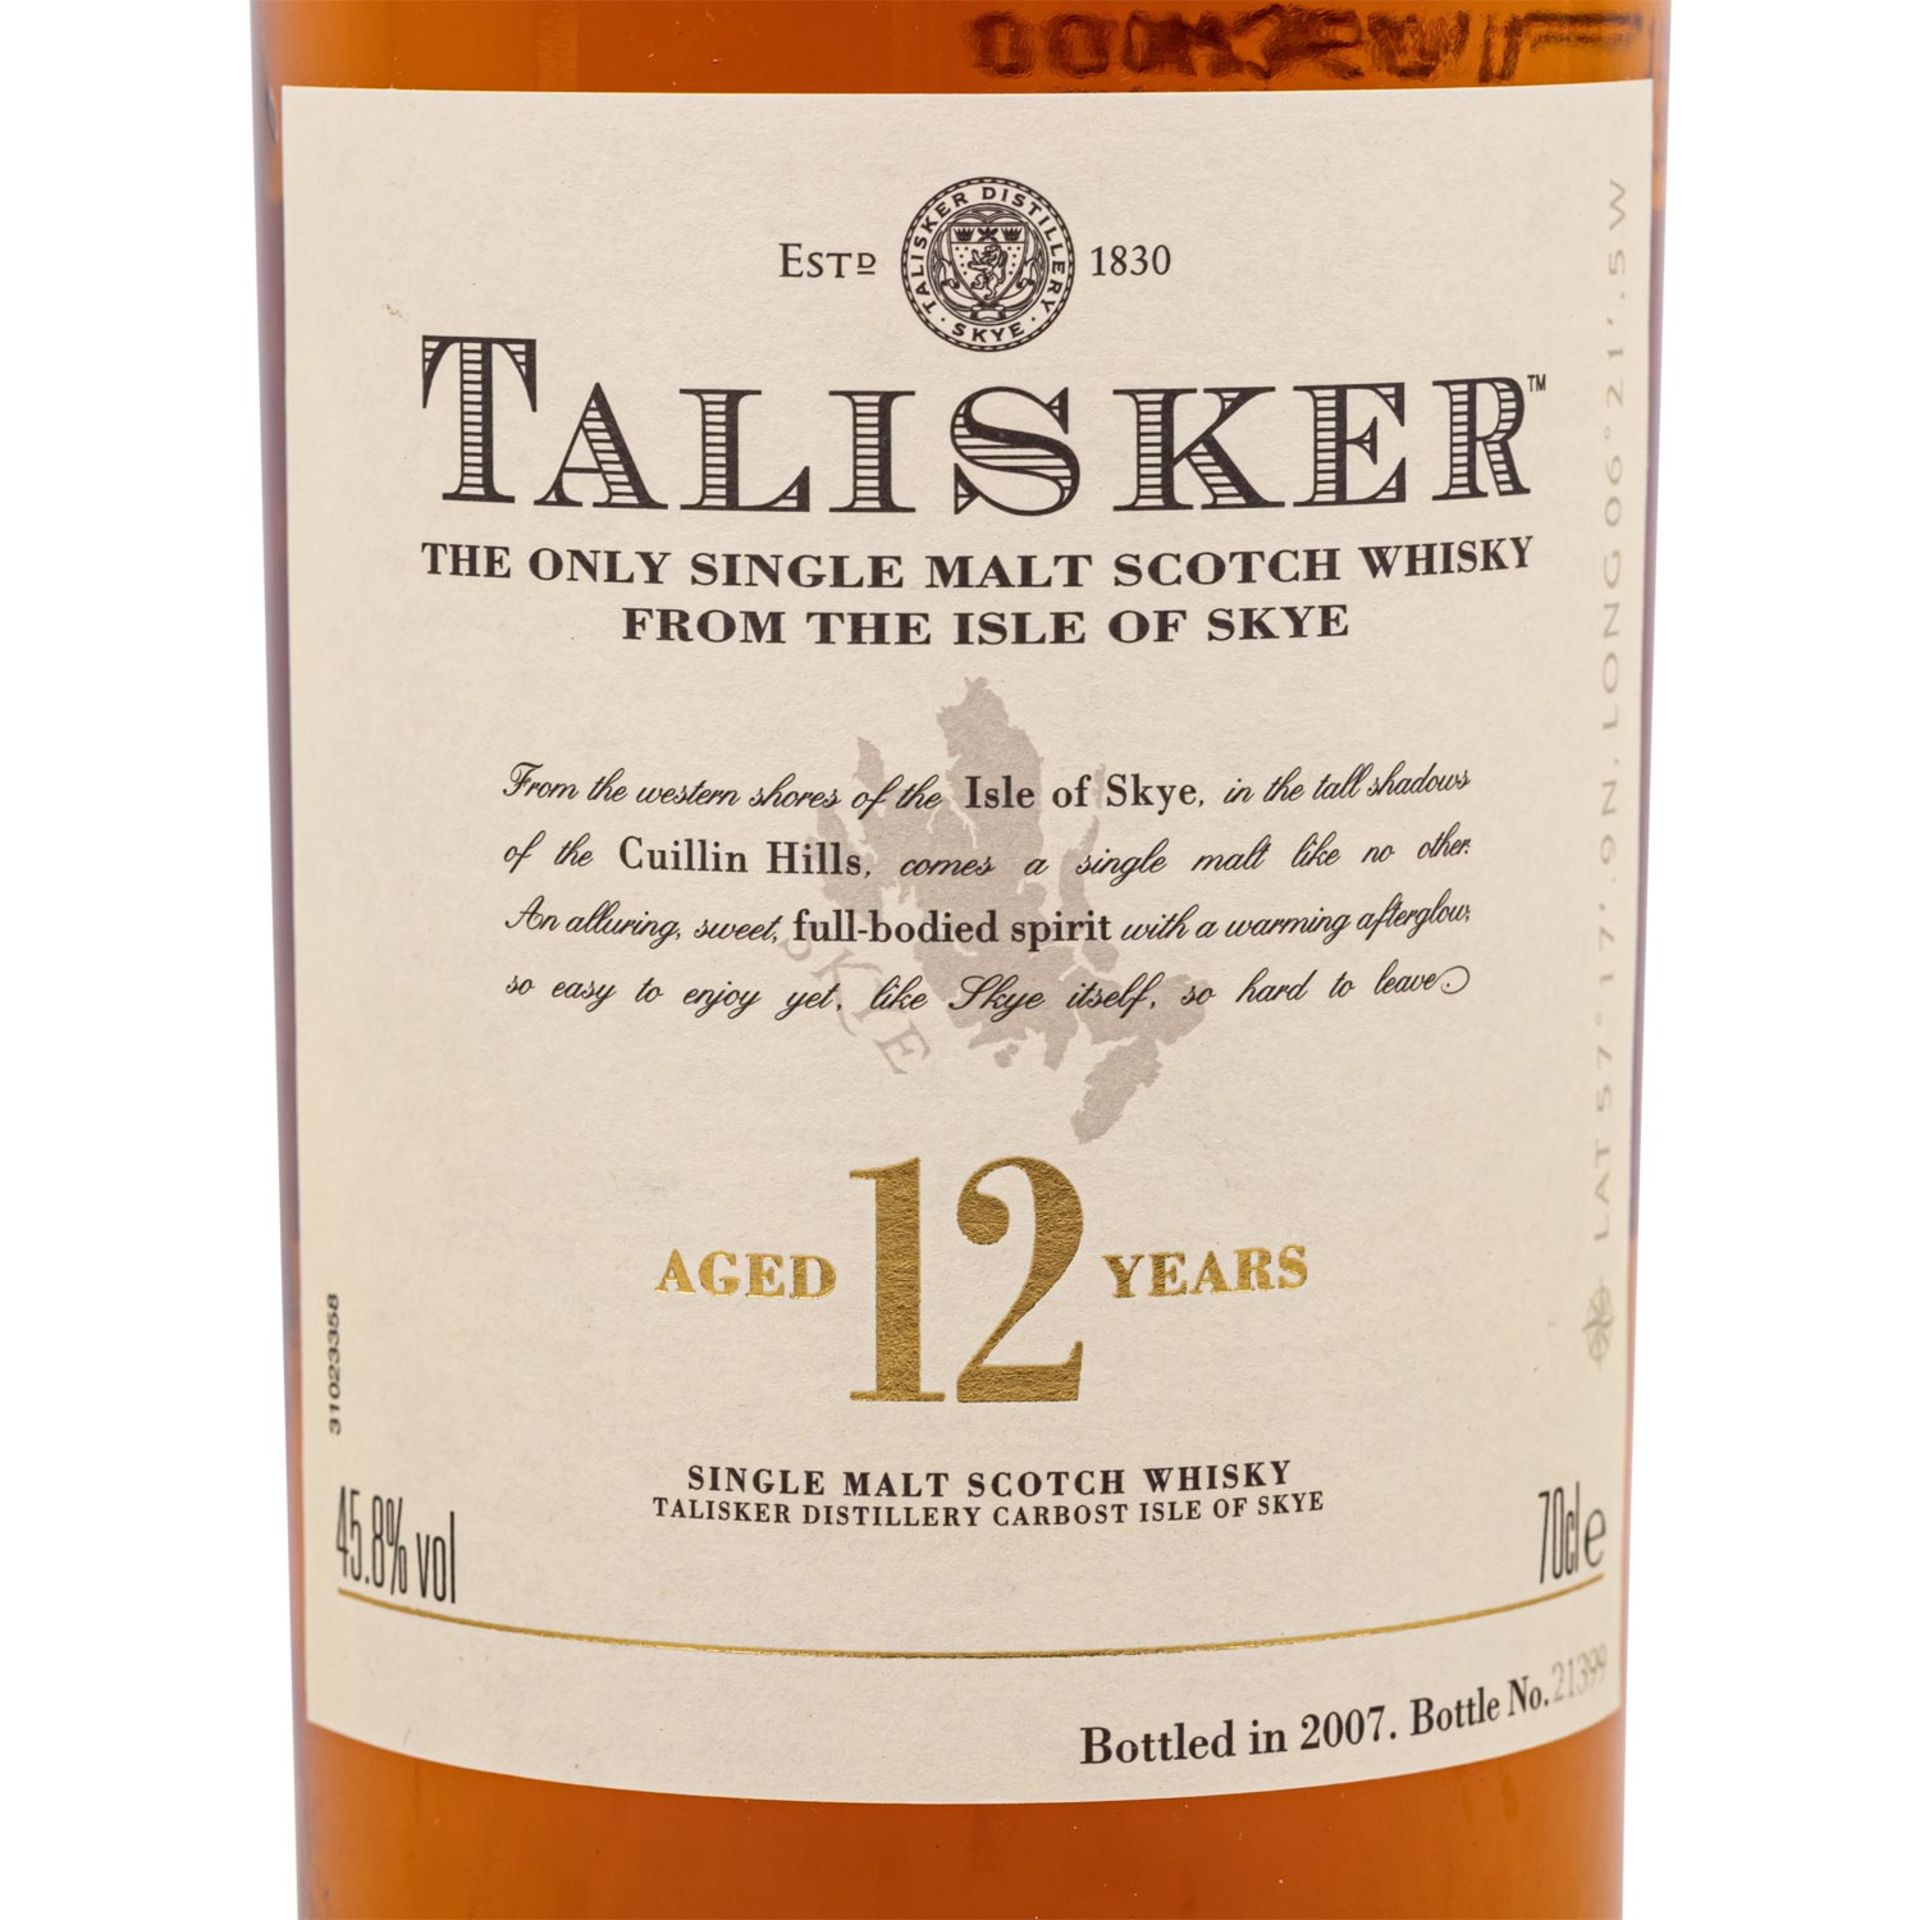 TALISKER Single Malt Scotch Whisky "Aged 12 Years", A special edition of 21.500 - Bild 2 aus 4